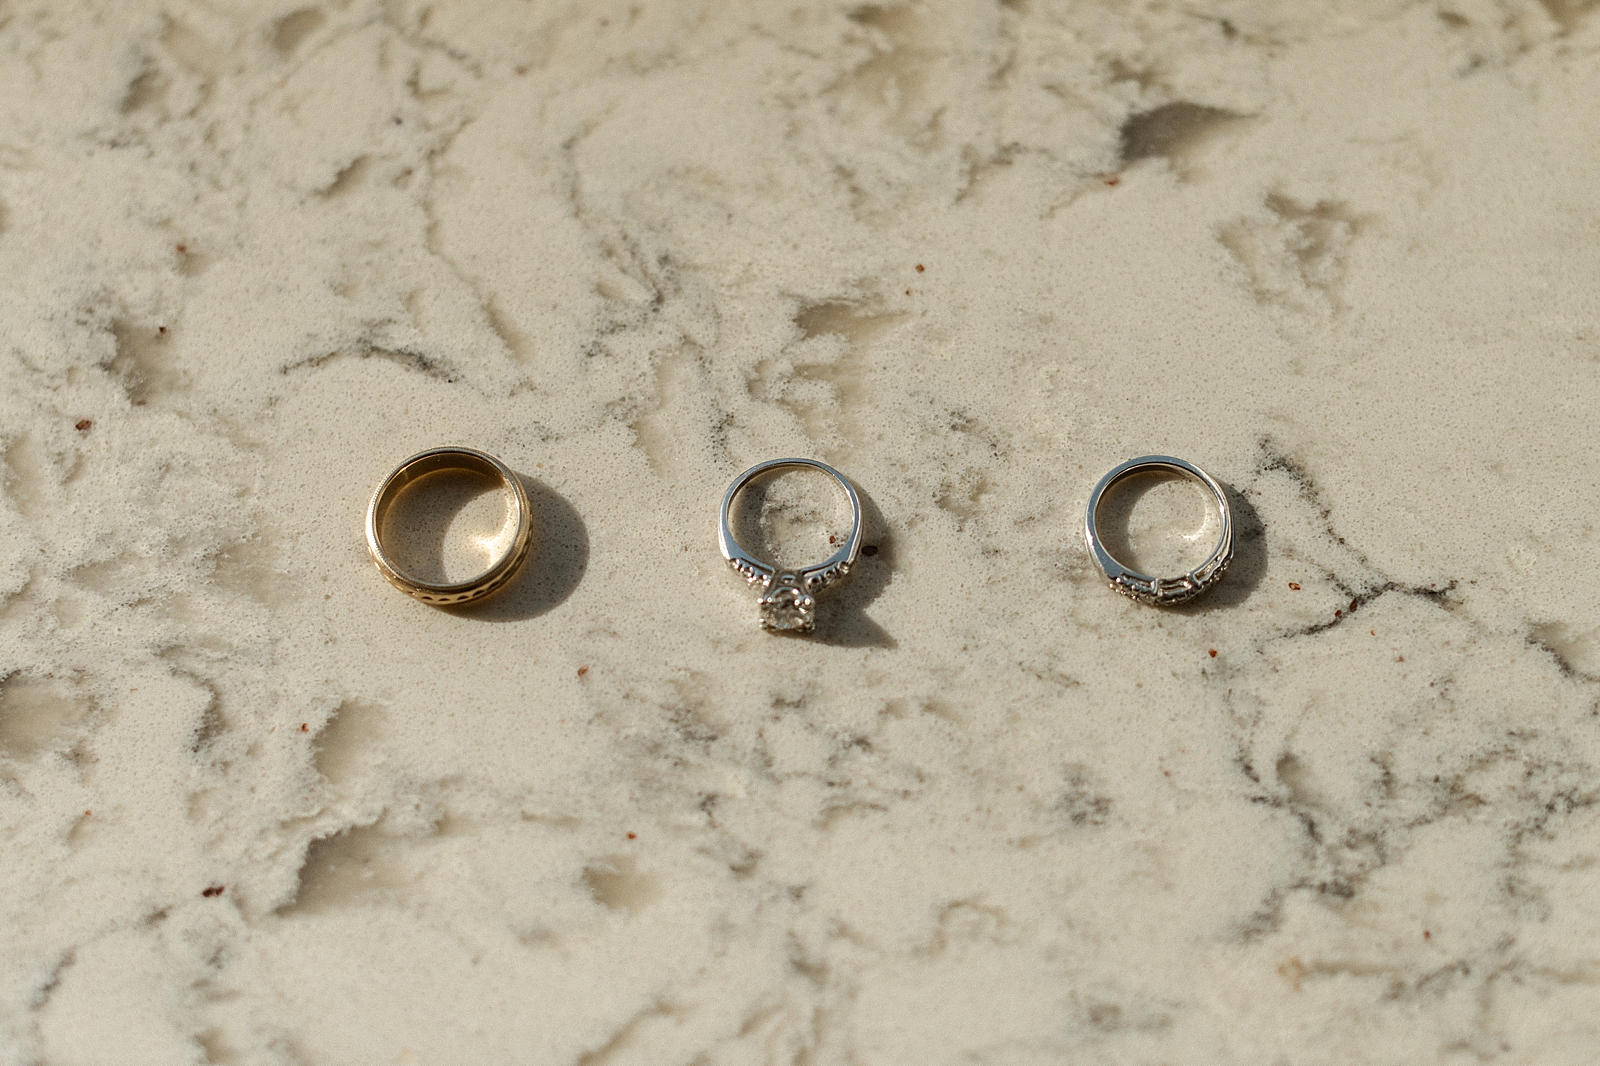 Detail shot of wedding bands and engagement ring on marble